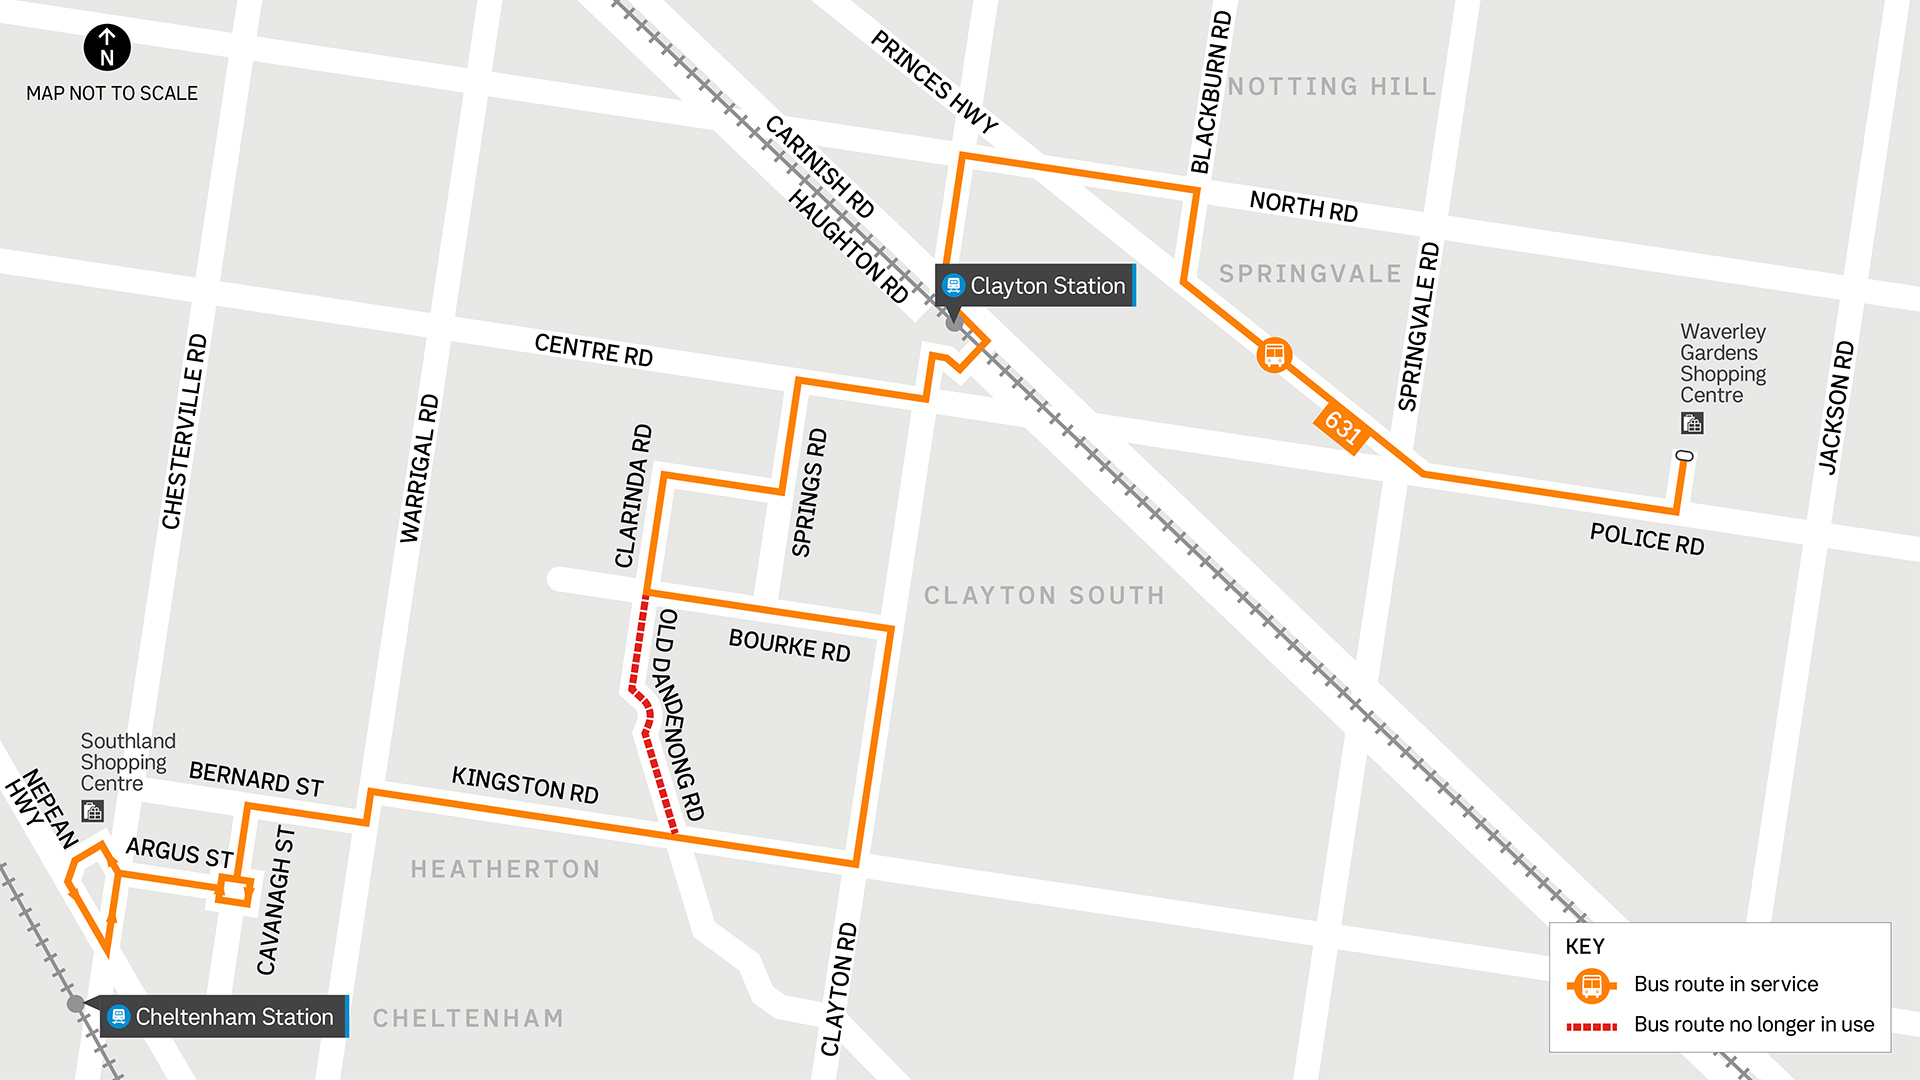 A map of the Heatherton bus route changes